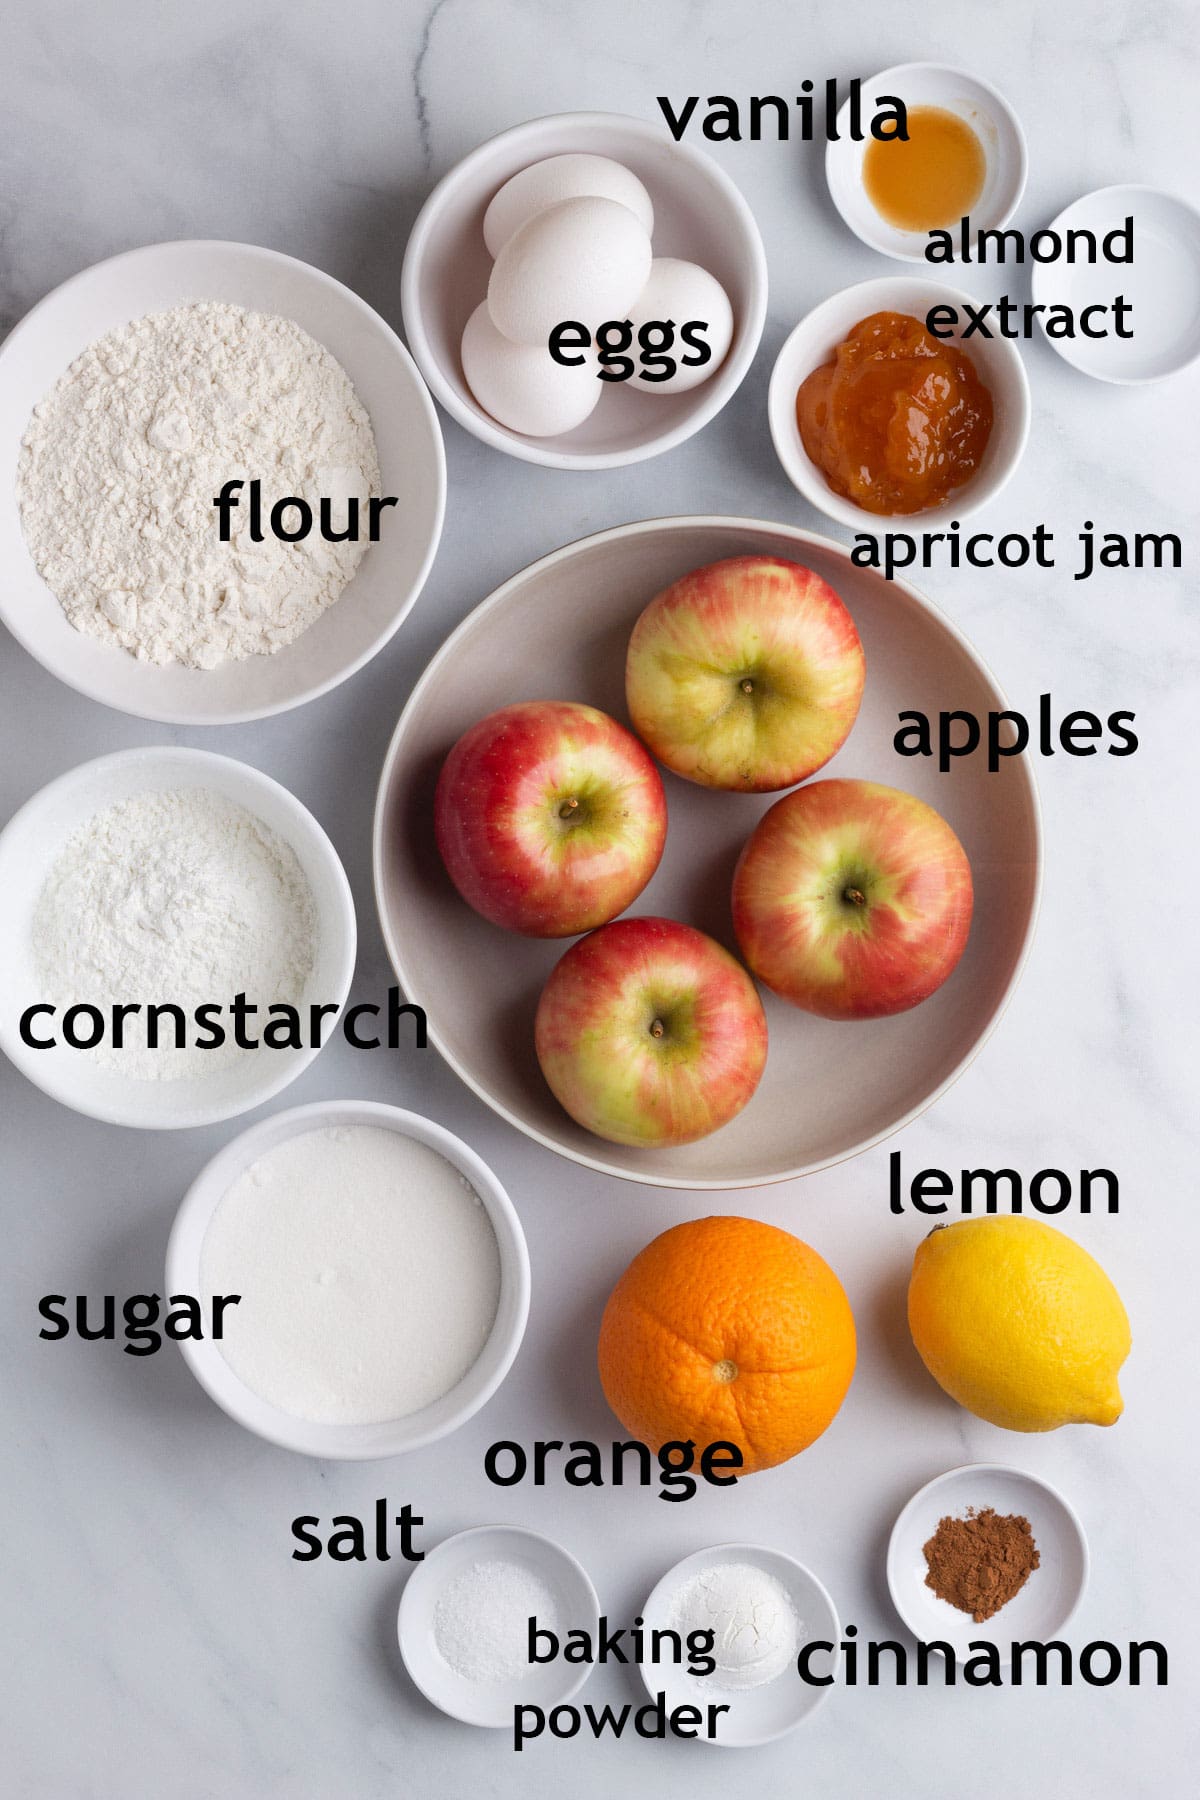 Cake ingredients, including apples, almond paste, flour, cornstarch, sugar, eggs, cinnamon and almond extract.